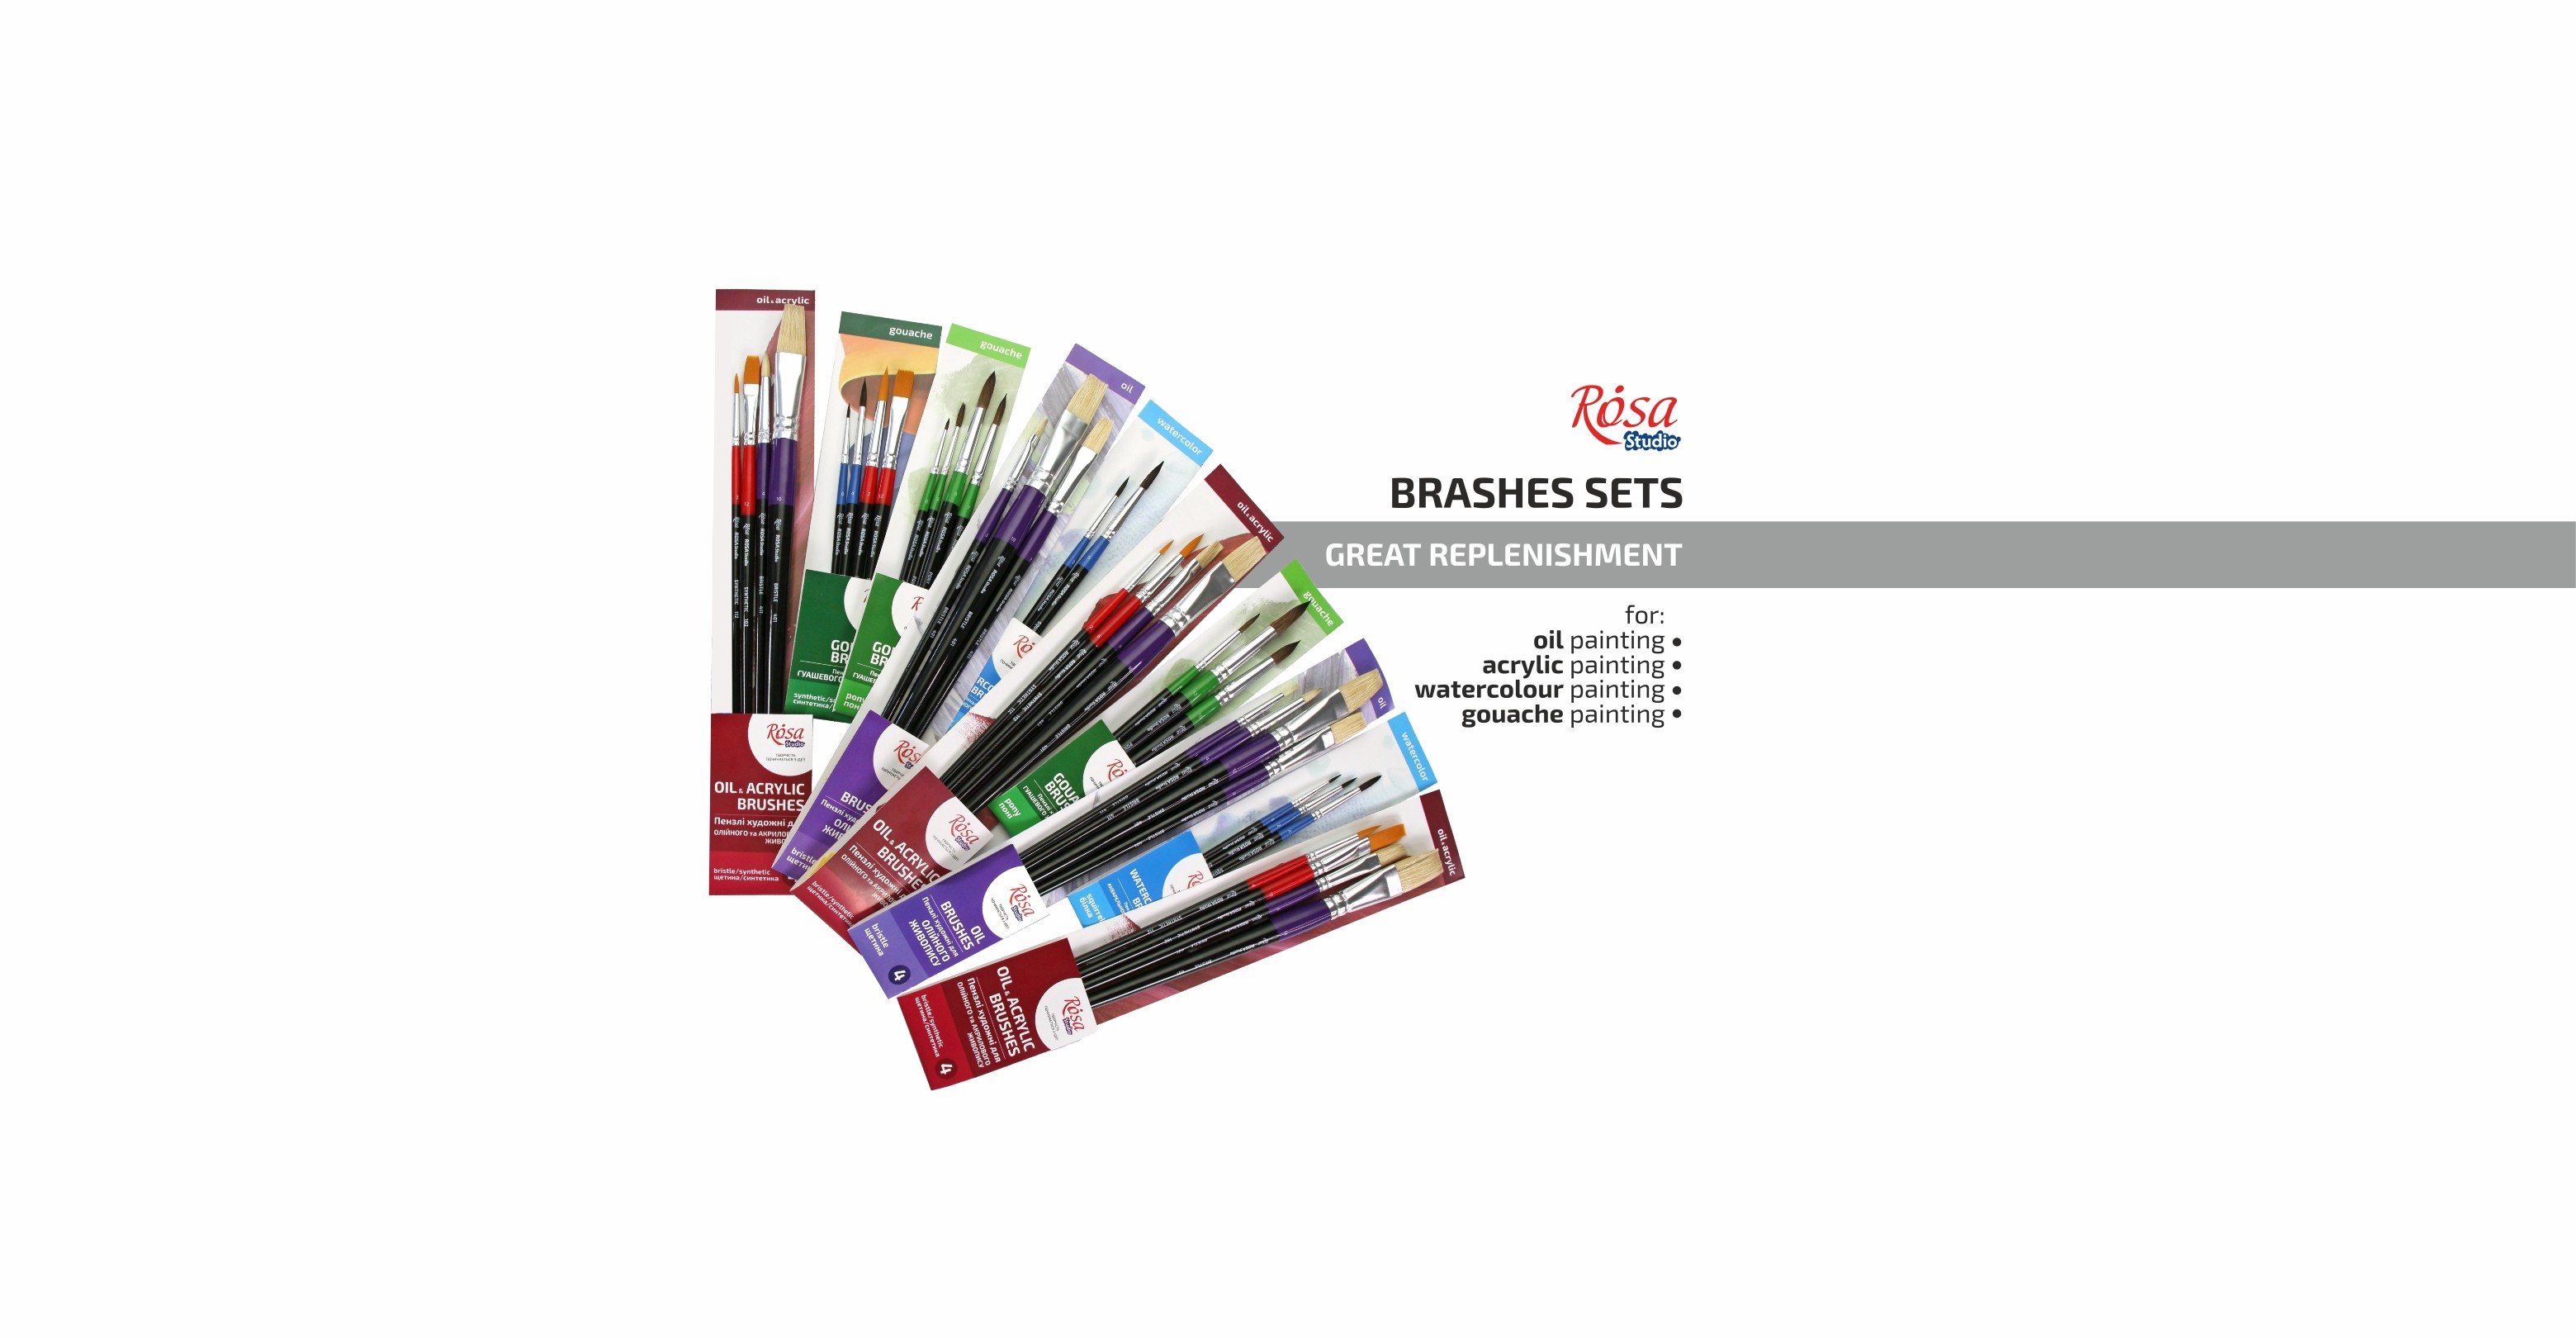 Brushes sets from ROSA Studio!